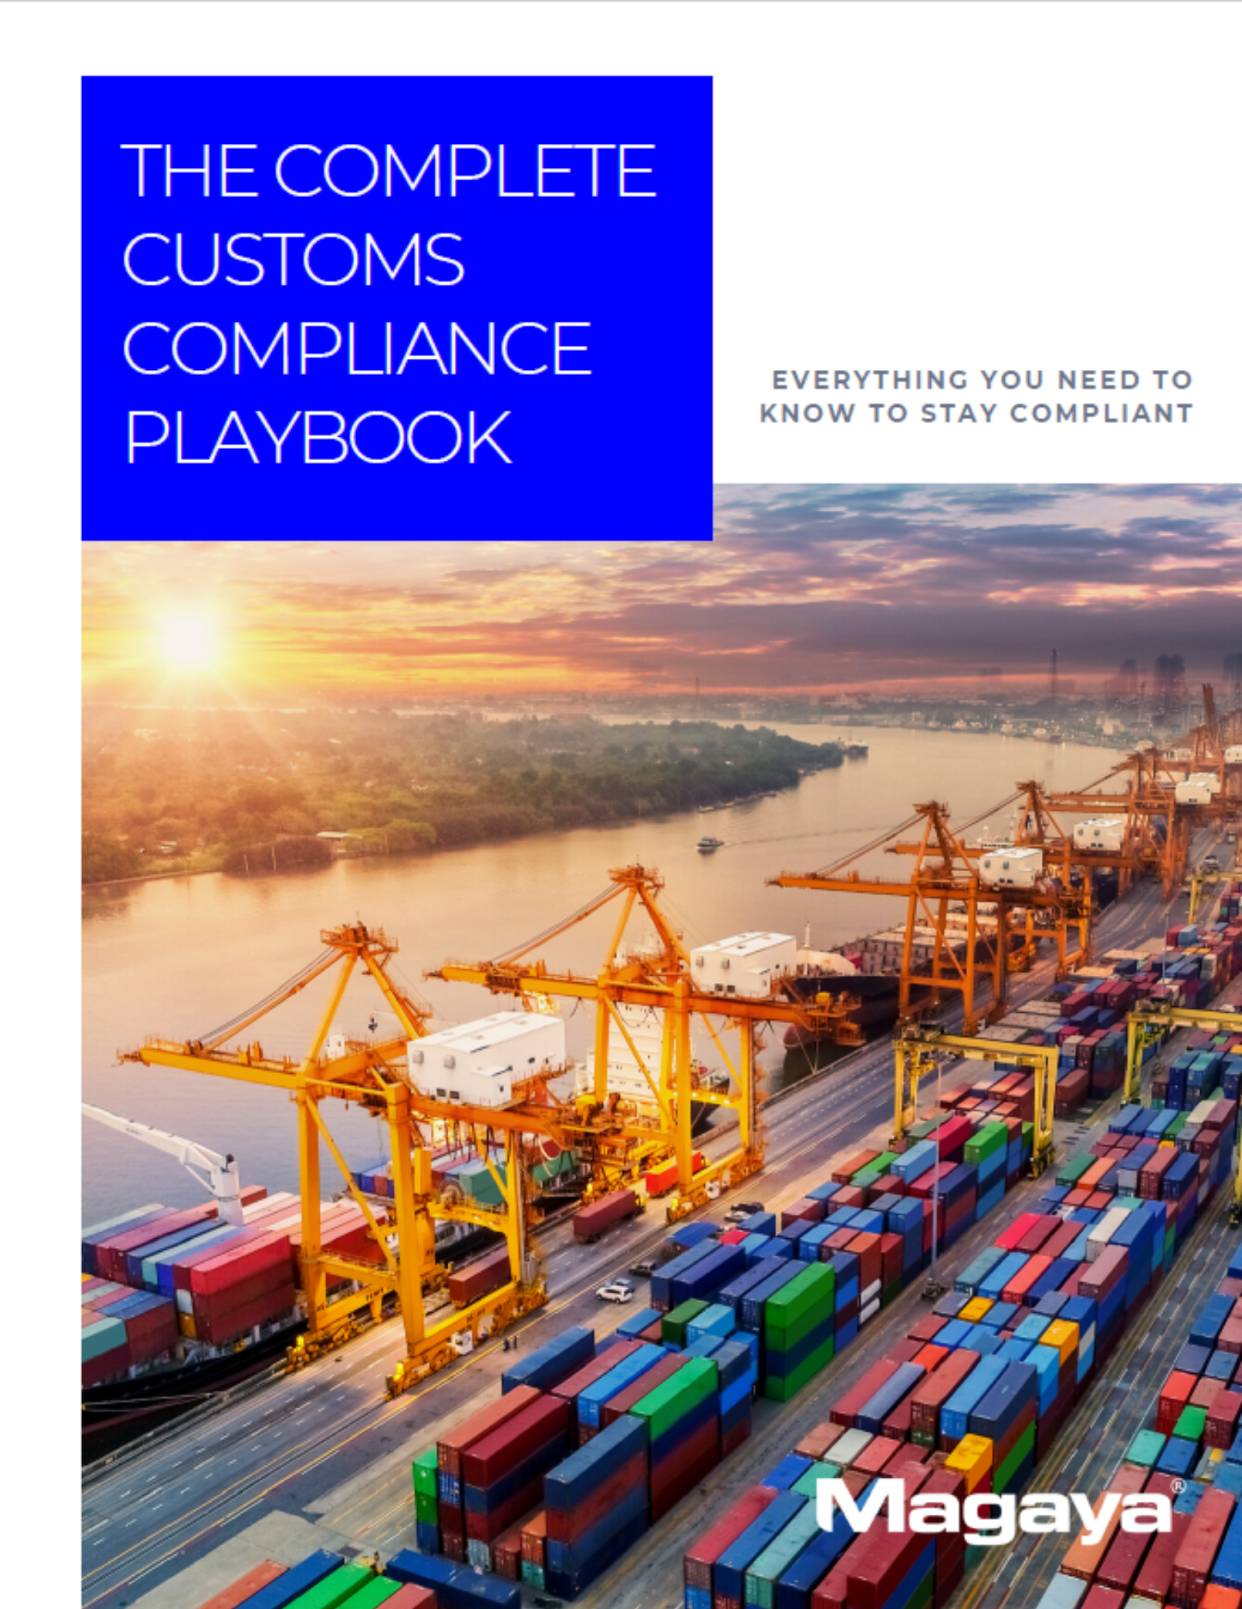 The Complete Customs Compliance Playbook